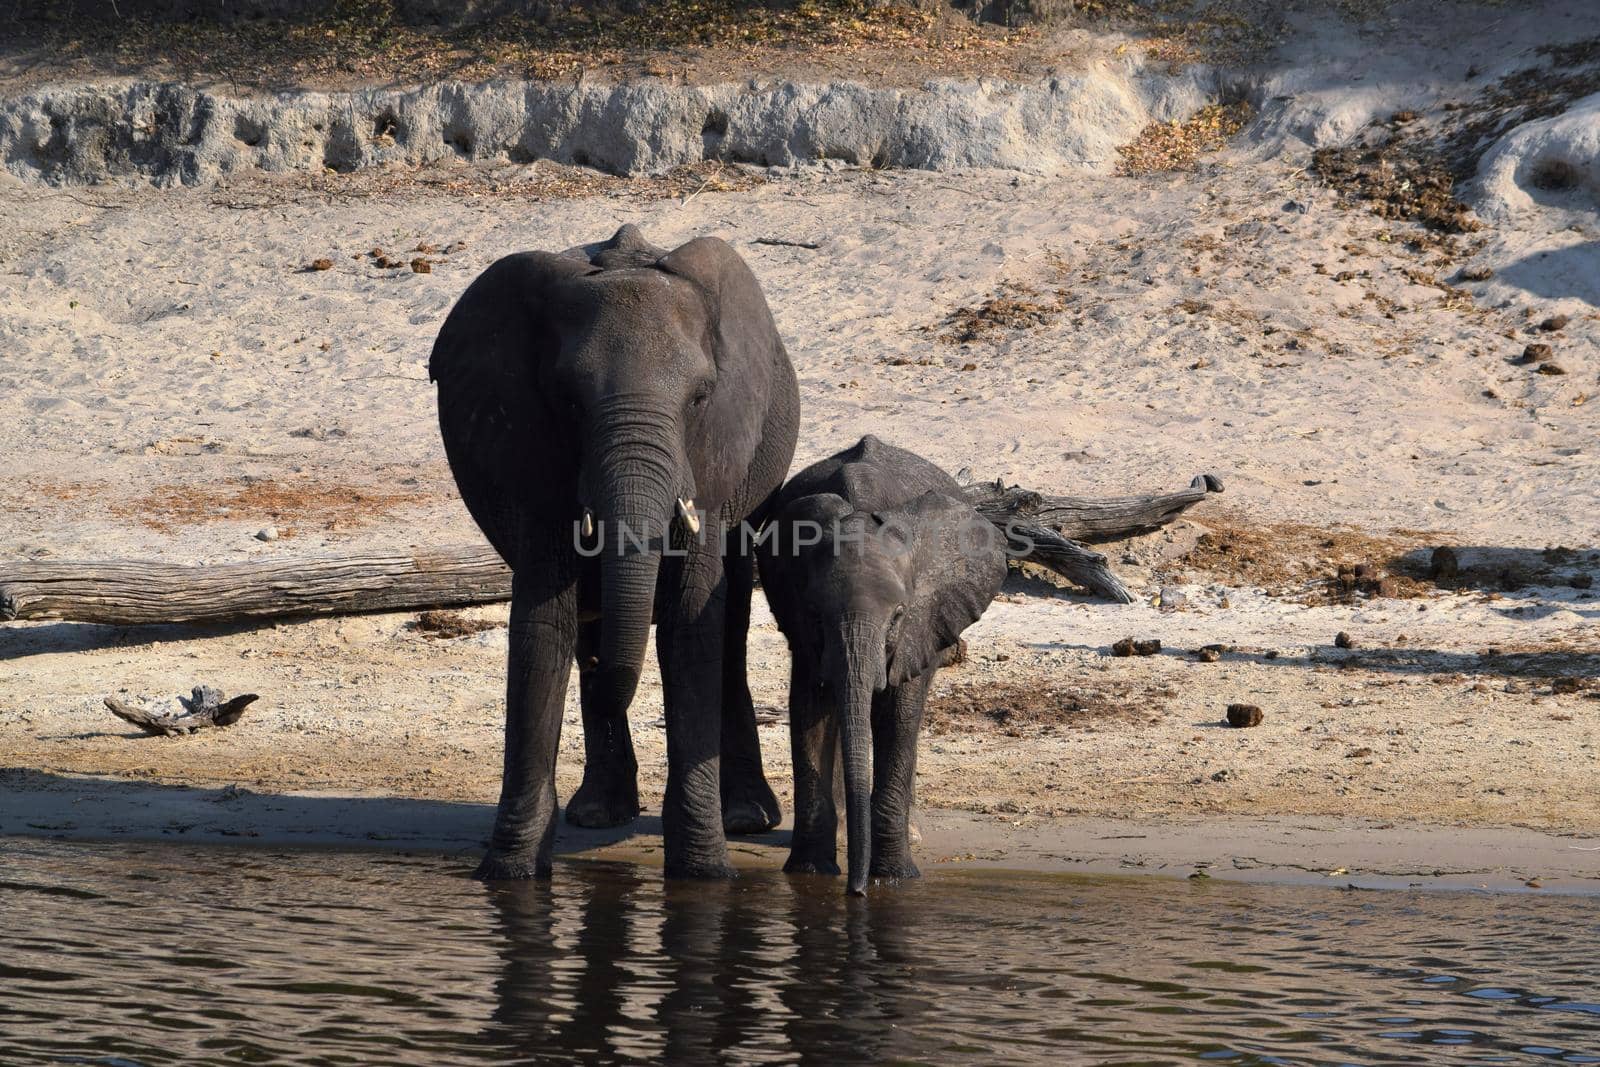 An elephant mom with her baby on the bank of the Chobe River, Botswana